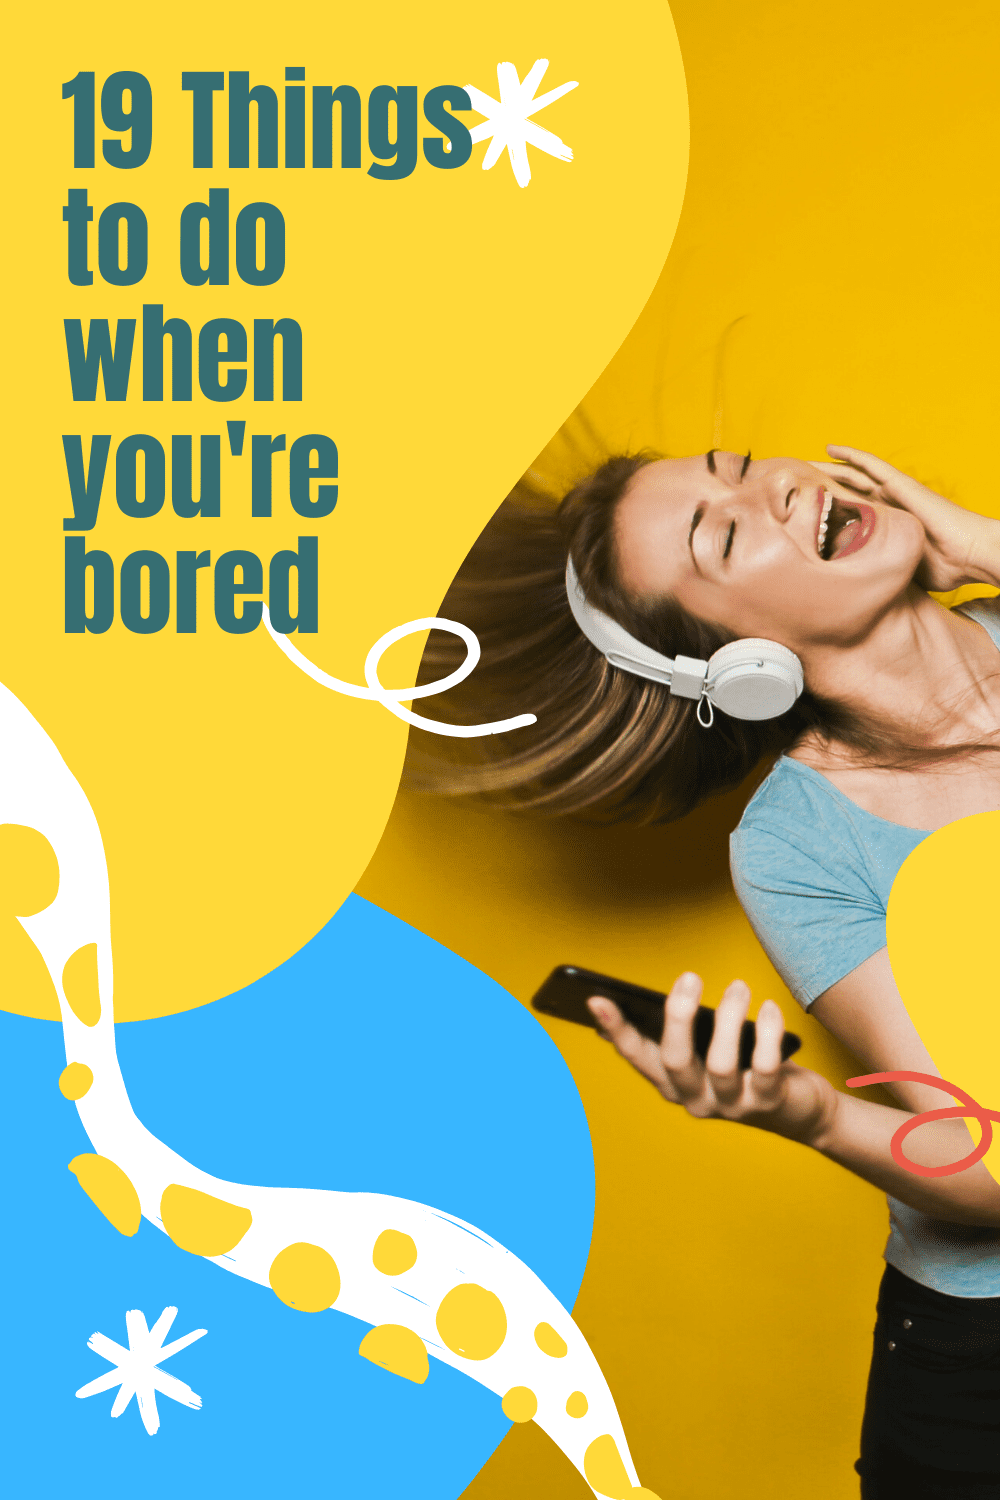 19 things to do when you're bored